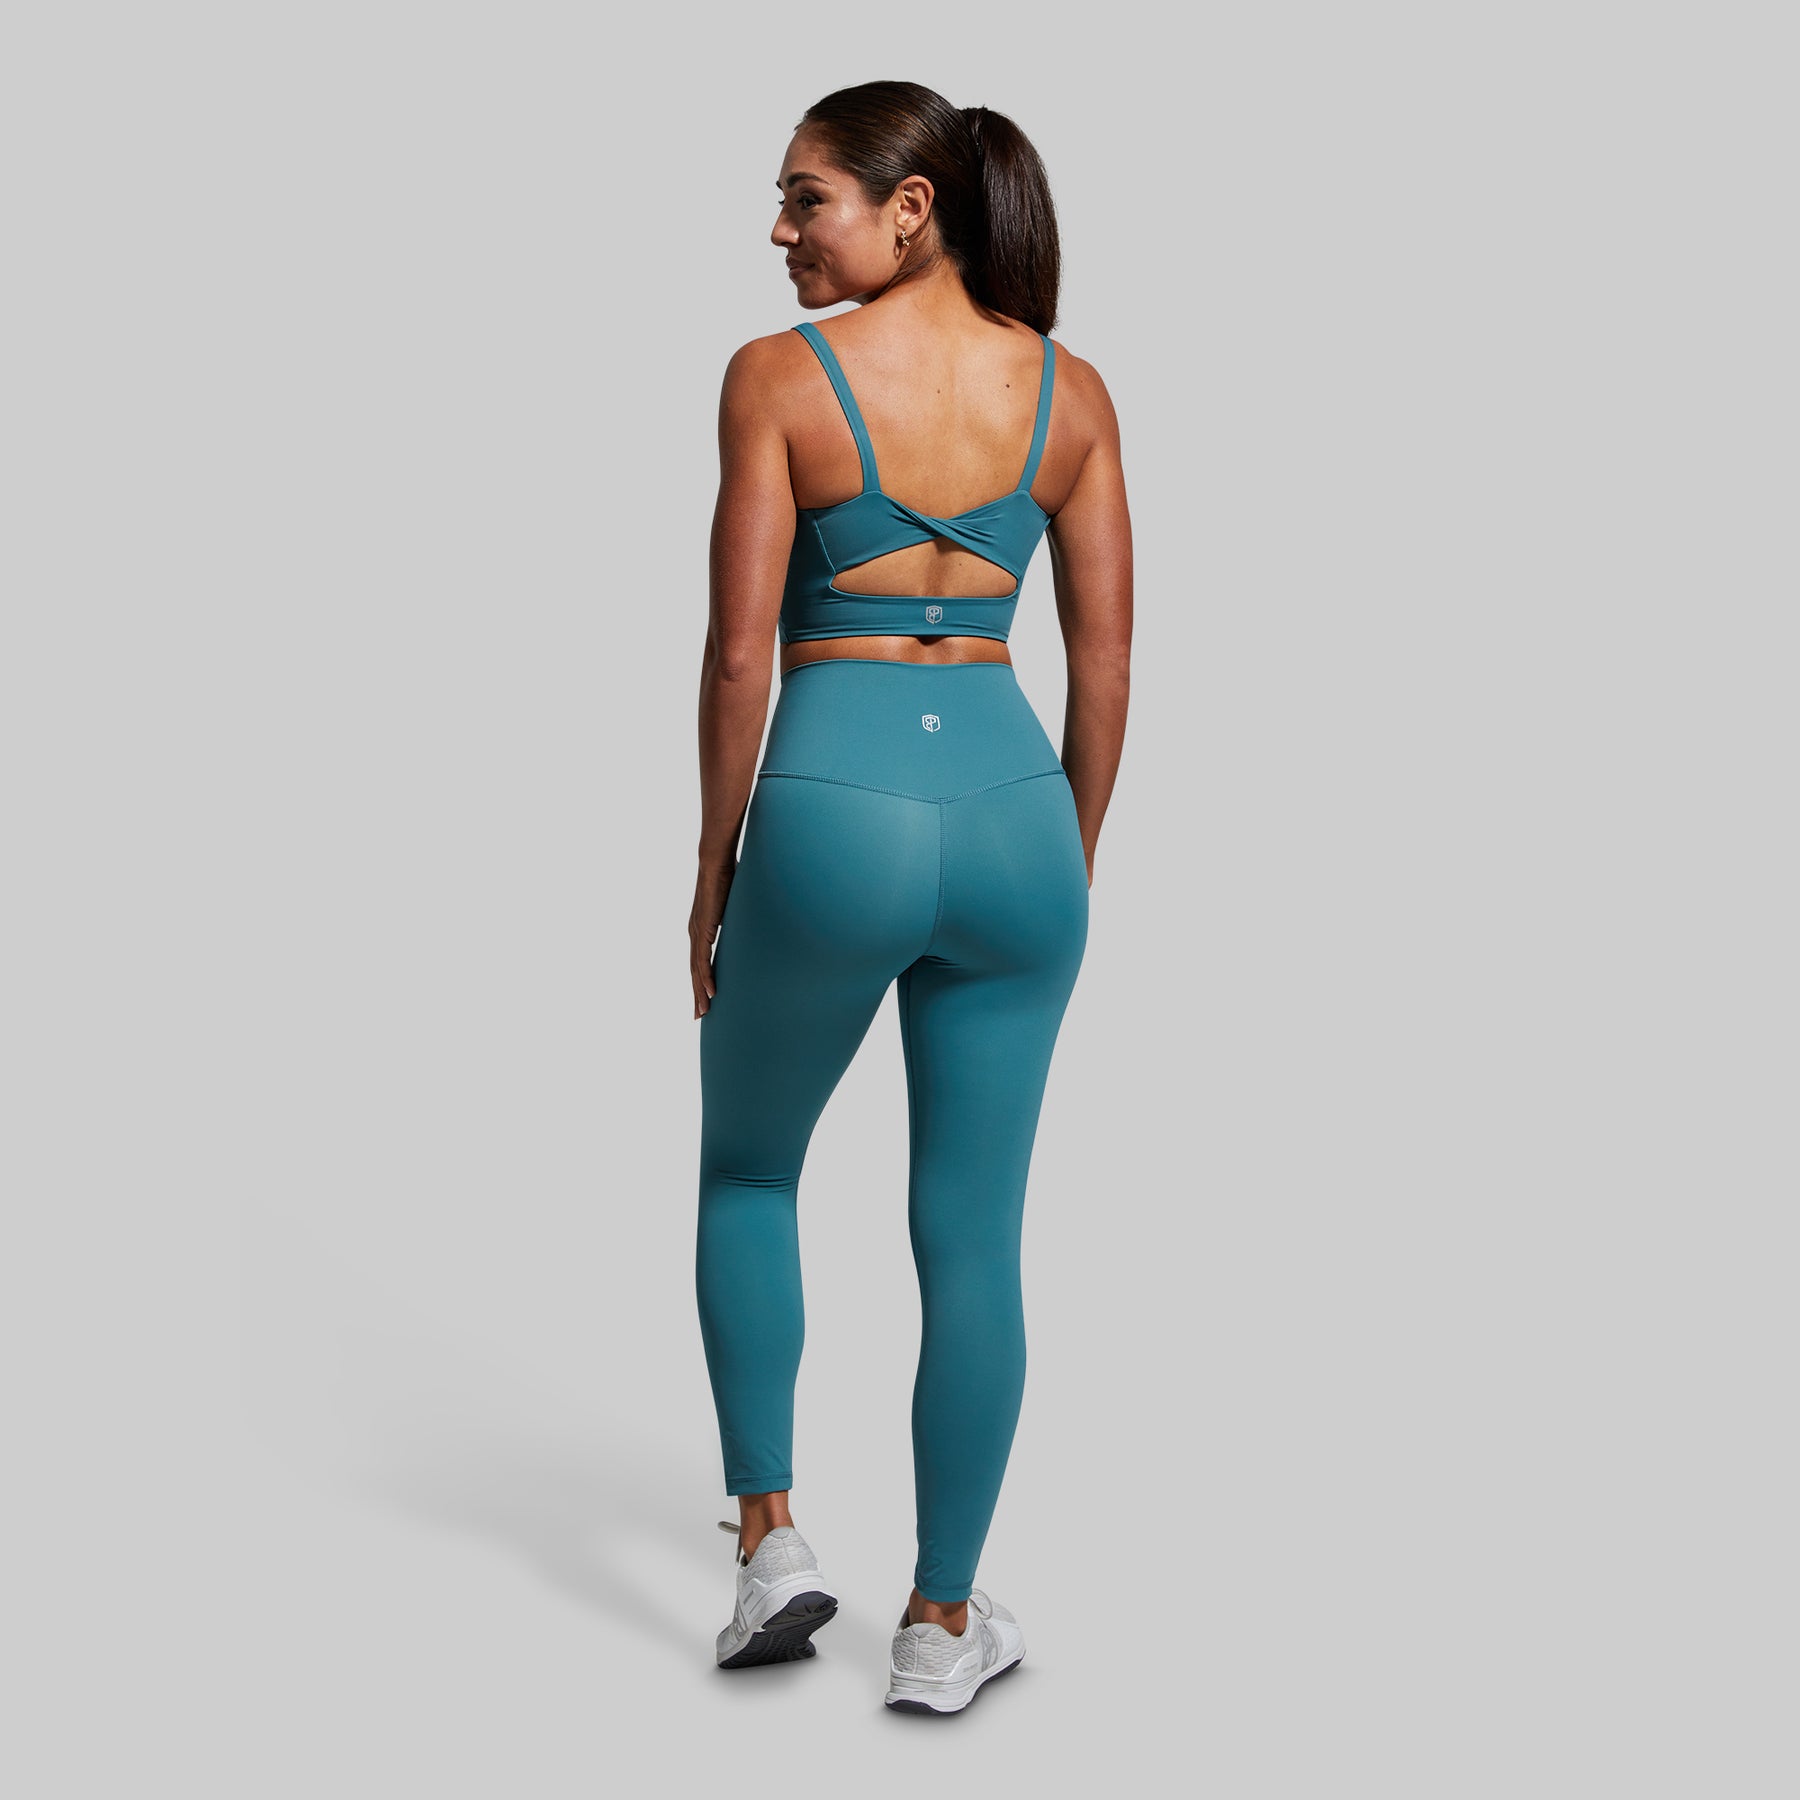 Turquoise Workout Leggings for Women